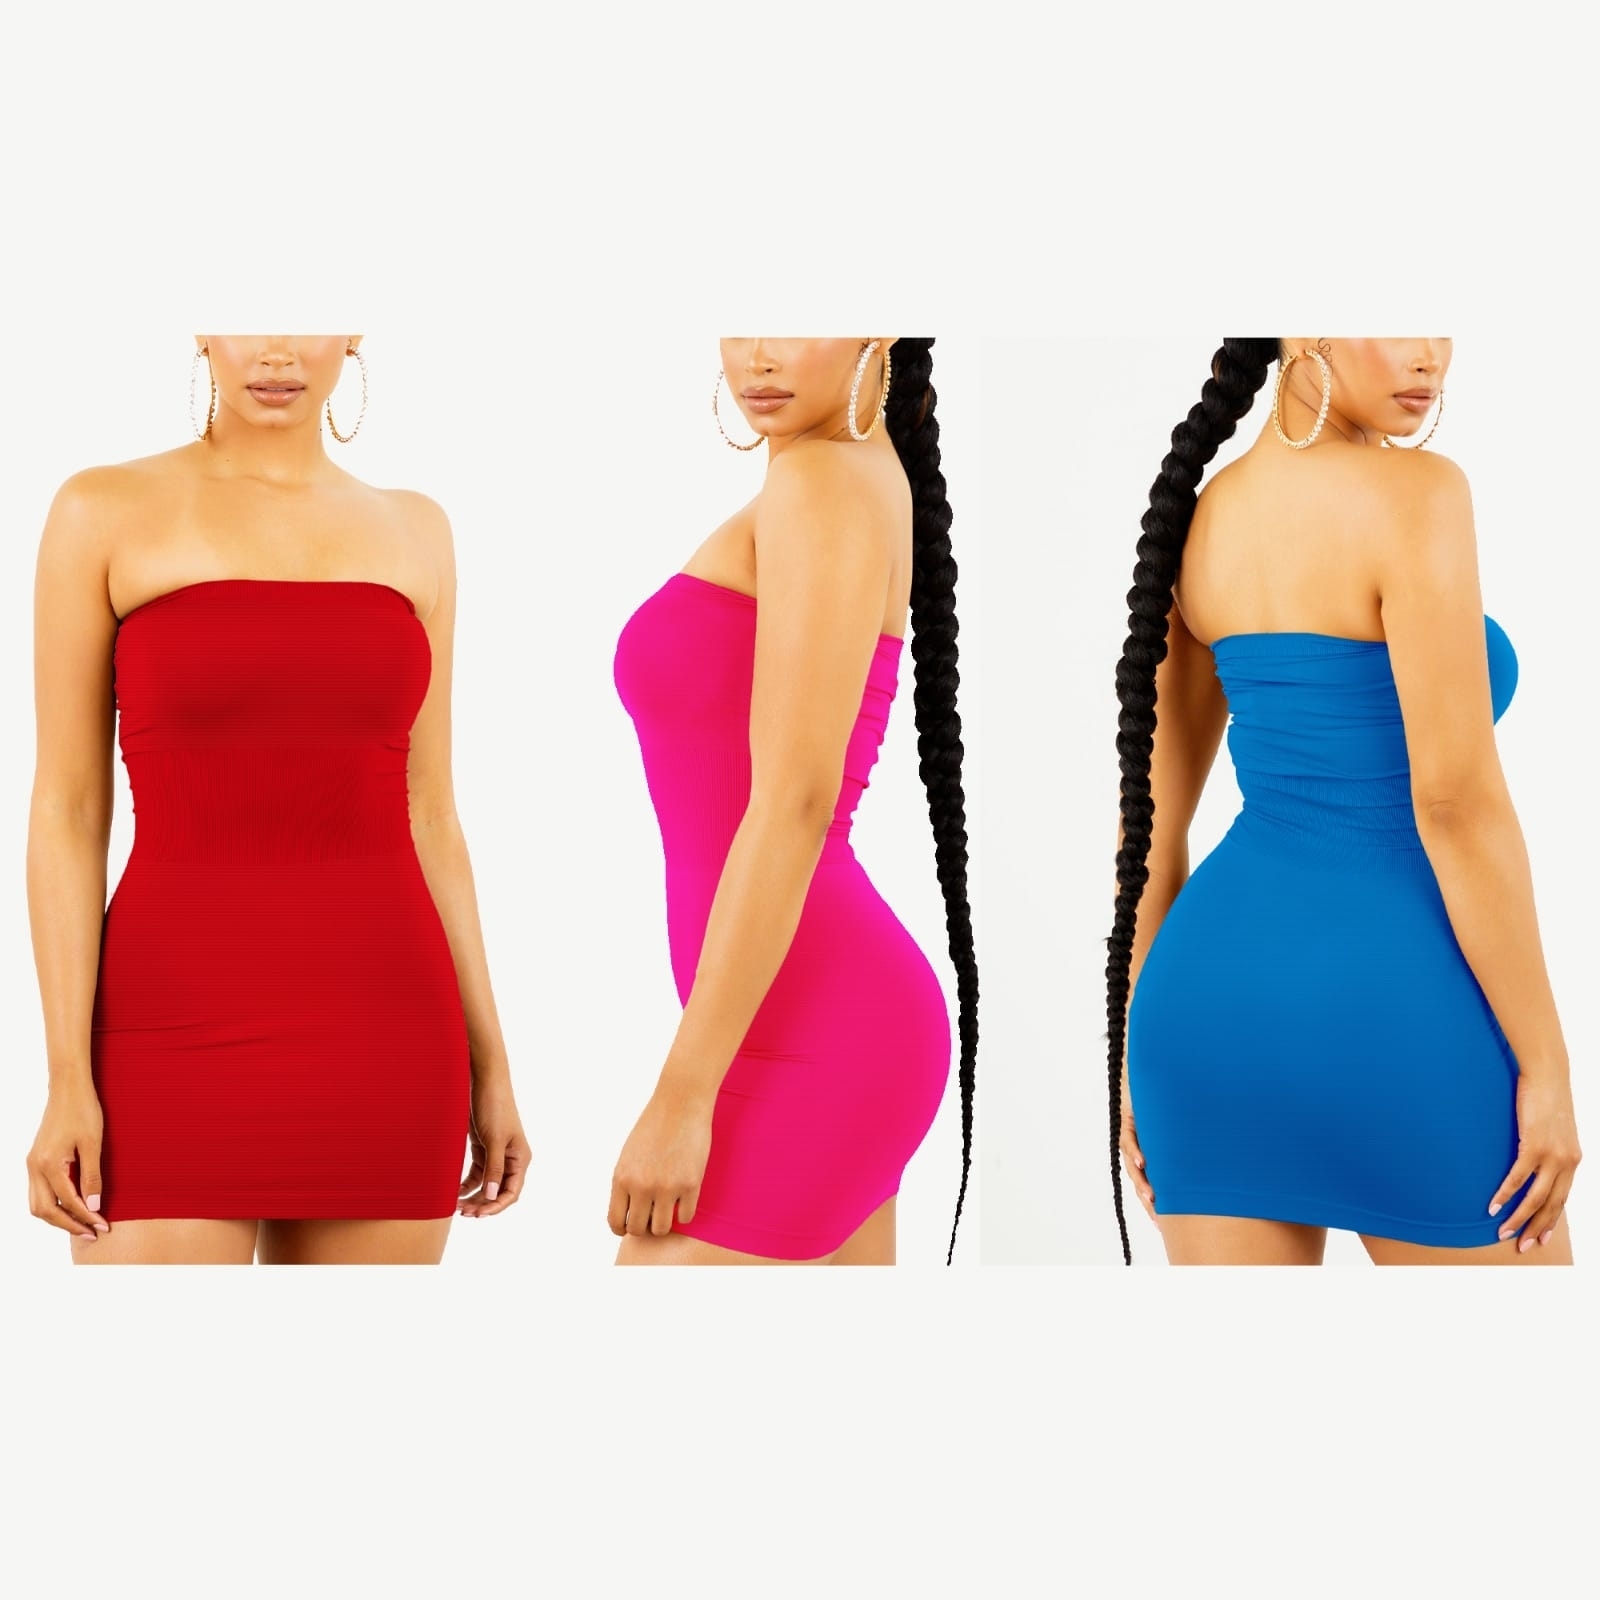 2-Pack Women's Strapless Stretchy Tight Fit Seamless Body Con Mini Tube Top Dress - BLUE, 2XL